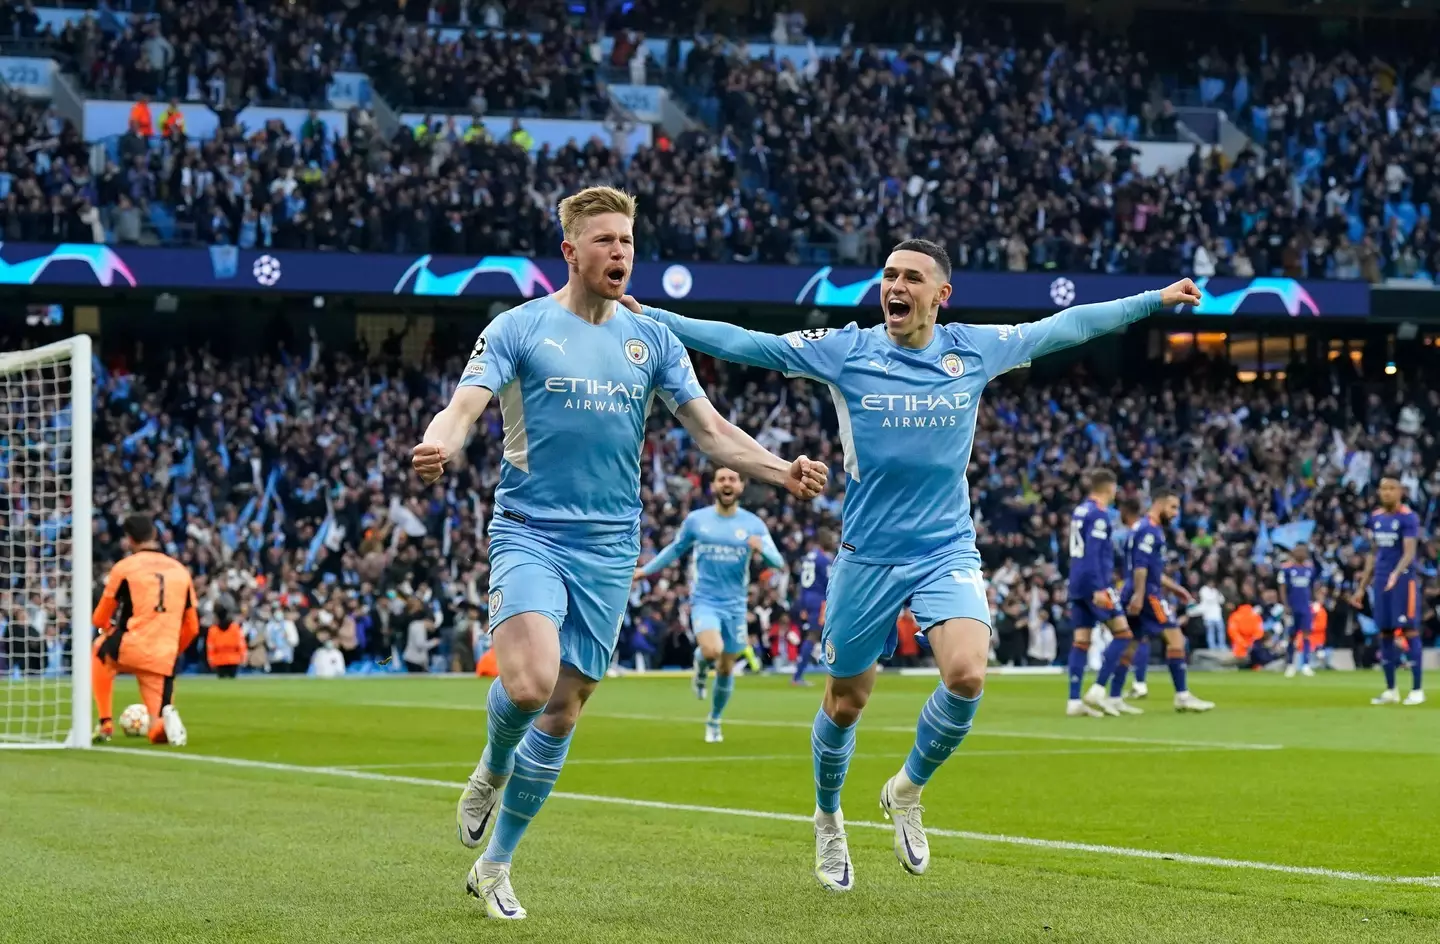 Manchester City's Kevin De Bruyne celebrates after scoring against Real Madrid in the Champions League semi-final (Image: Sportimage / Alamy)